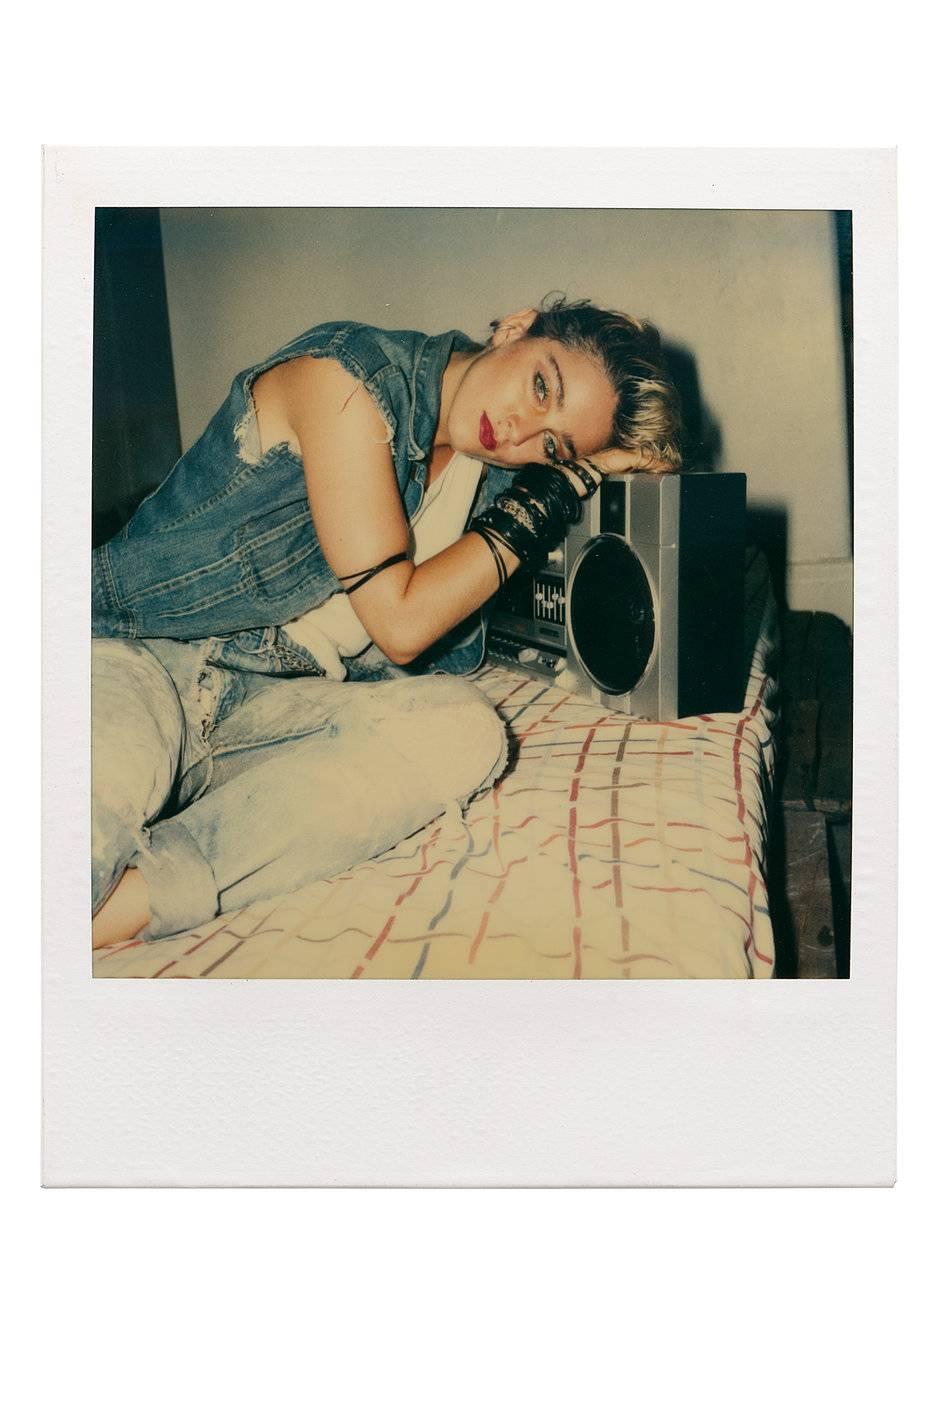 The original, Unique Polaroids of Madonna from Photographer Richard Corman’s 1983 photoshoot presenting the future cultural icon on the Precipice of Fame, six weeks before the release of her debut album.

We are offering the complete set of 66